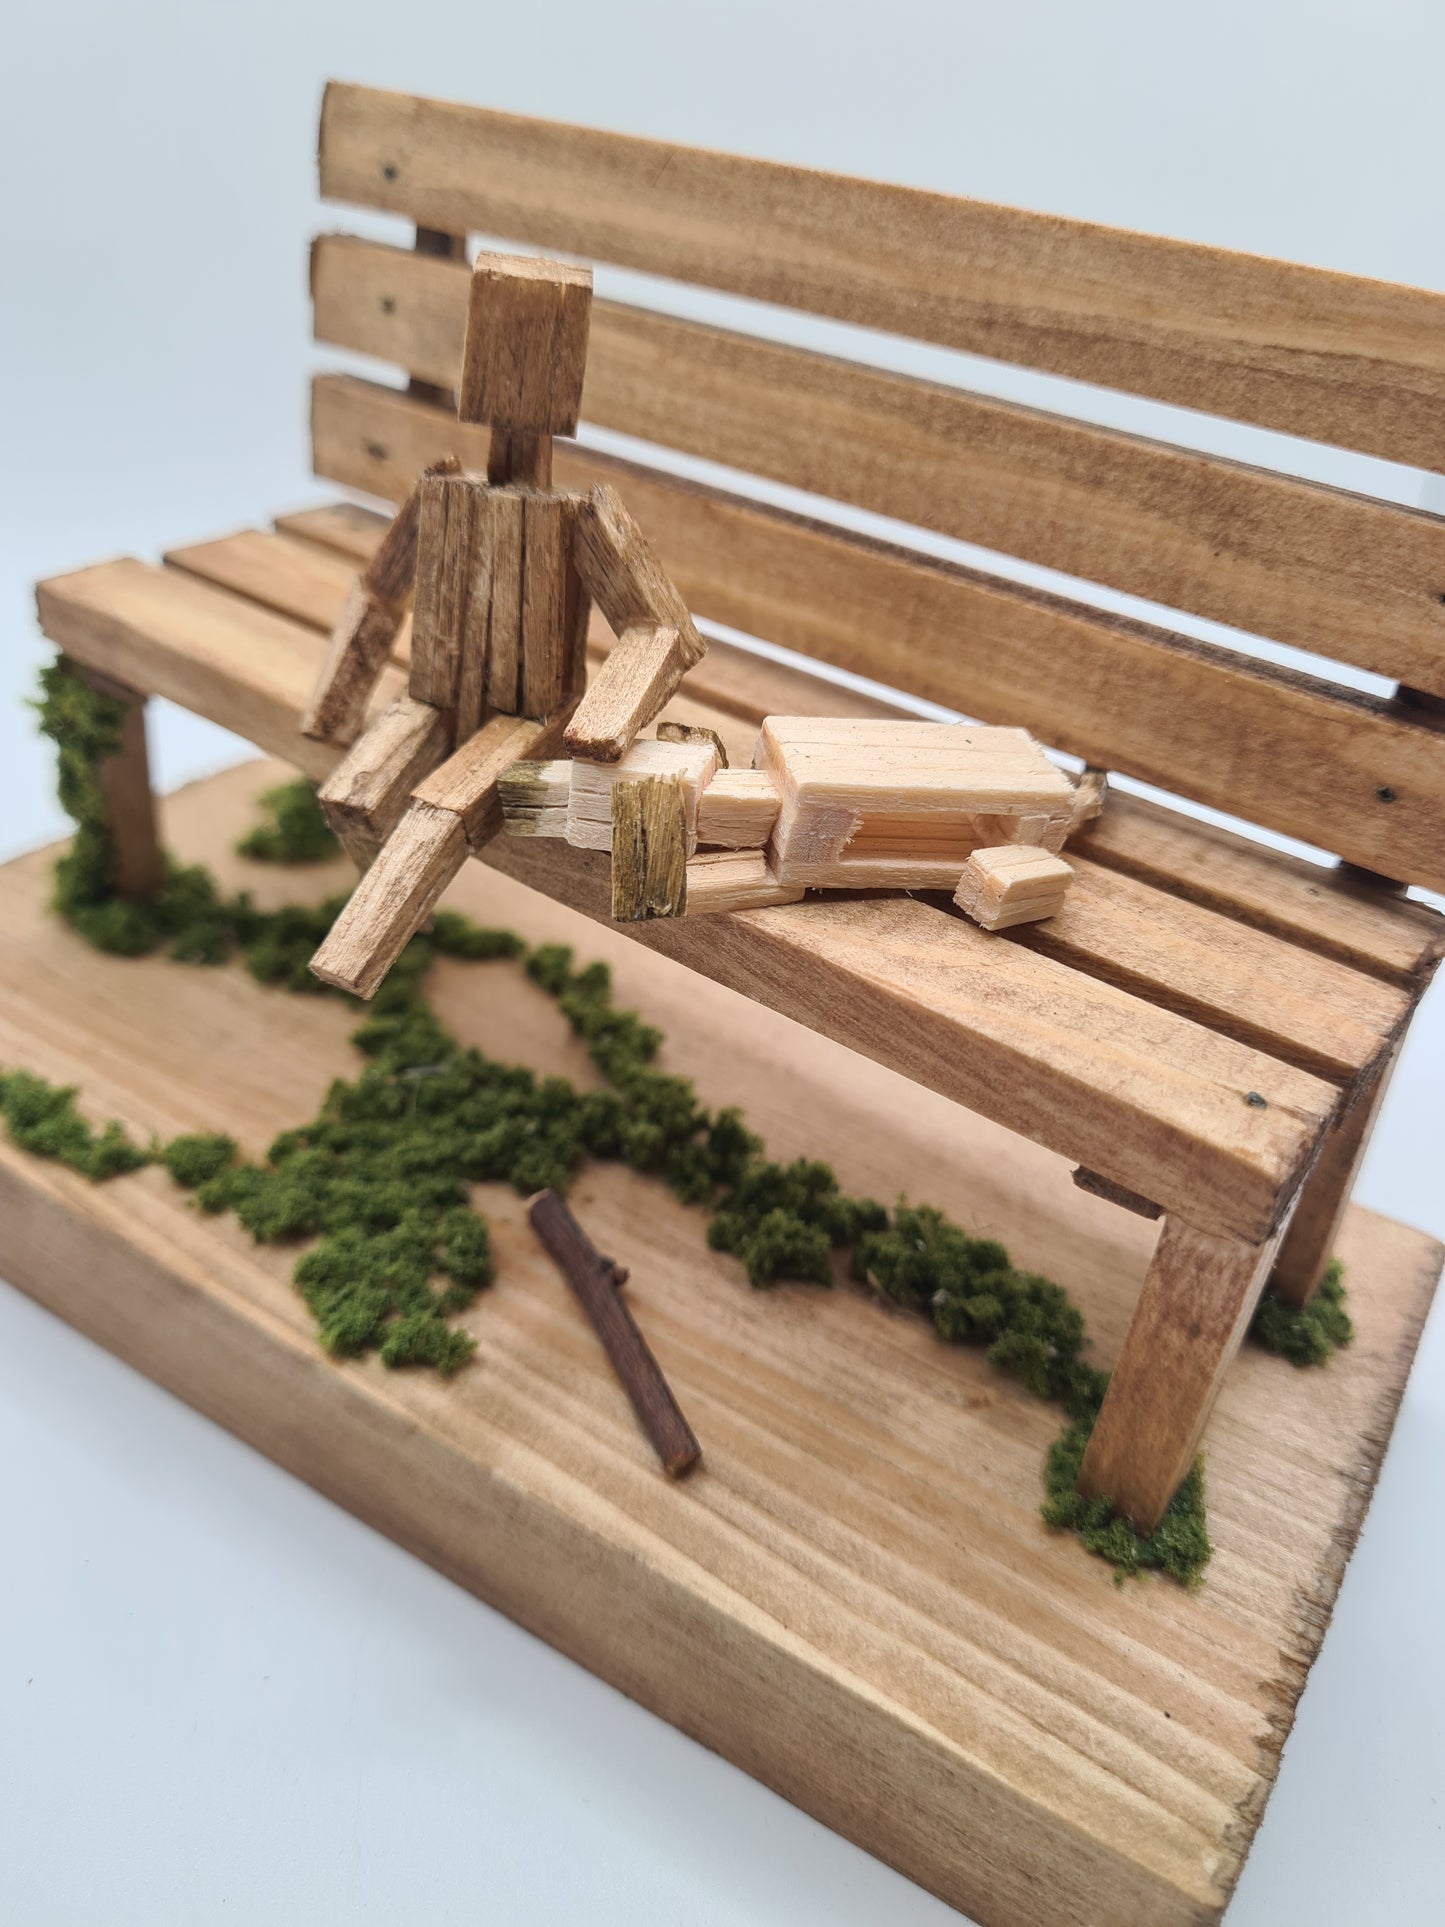 Doggo And Kid Sitting On The Bench - Handcrafted Wooden Matchstick Figures - Gifts, Ornaments and Decor By Tiggidy Designs